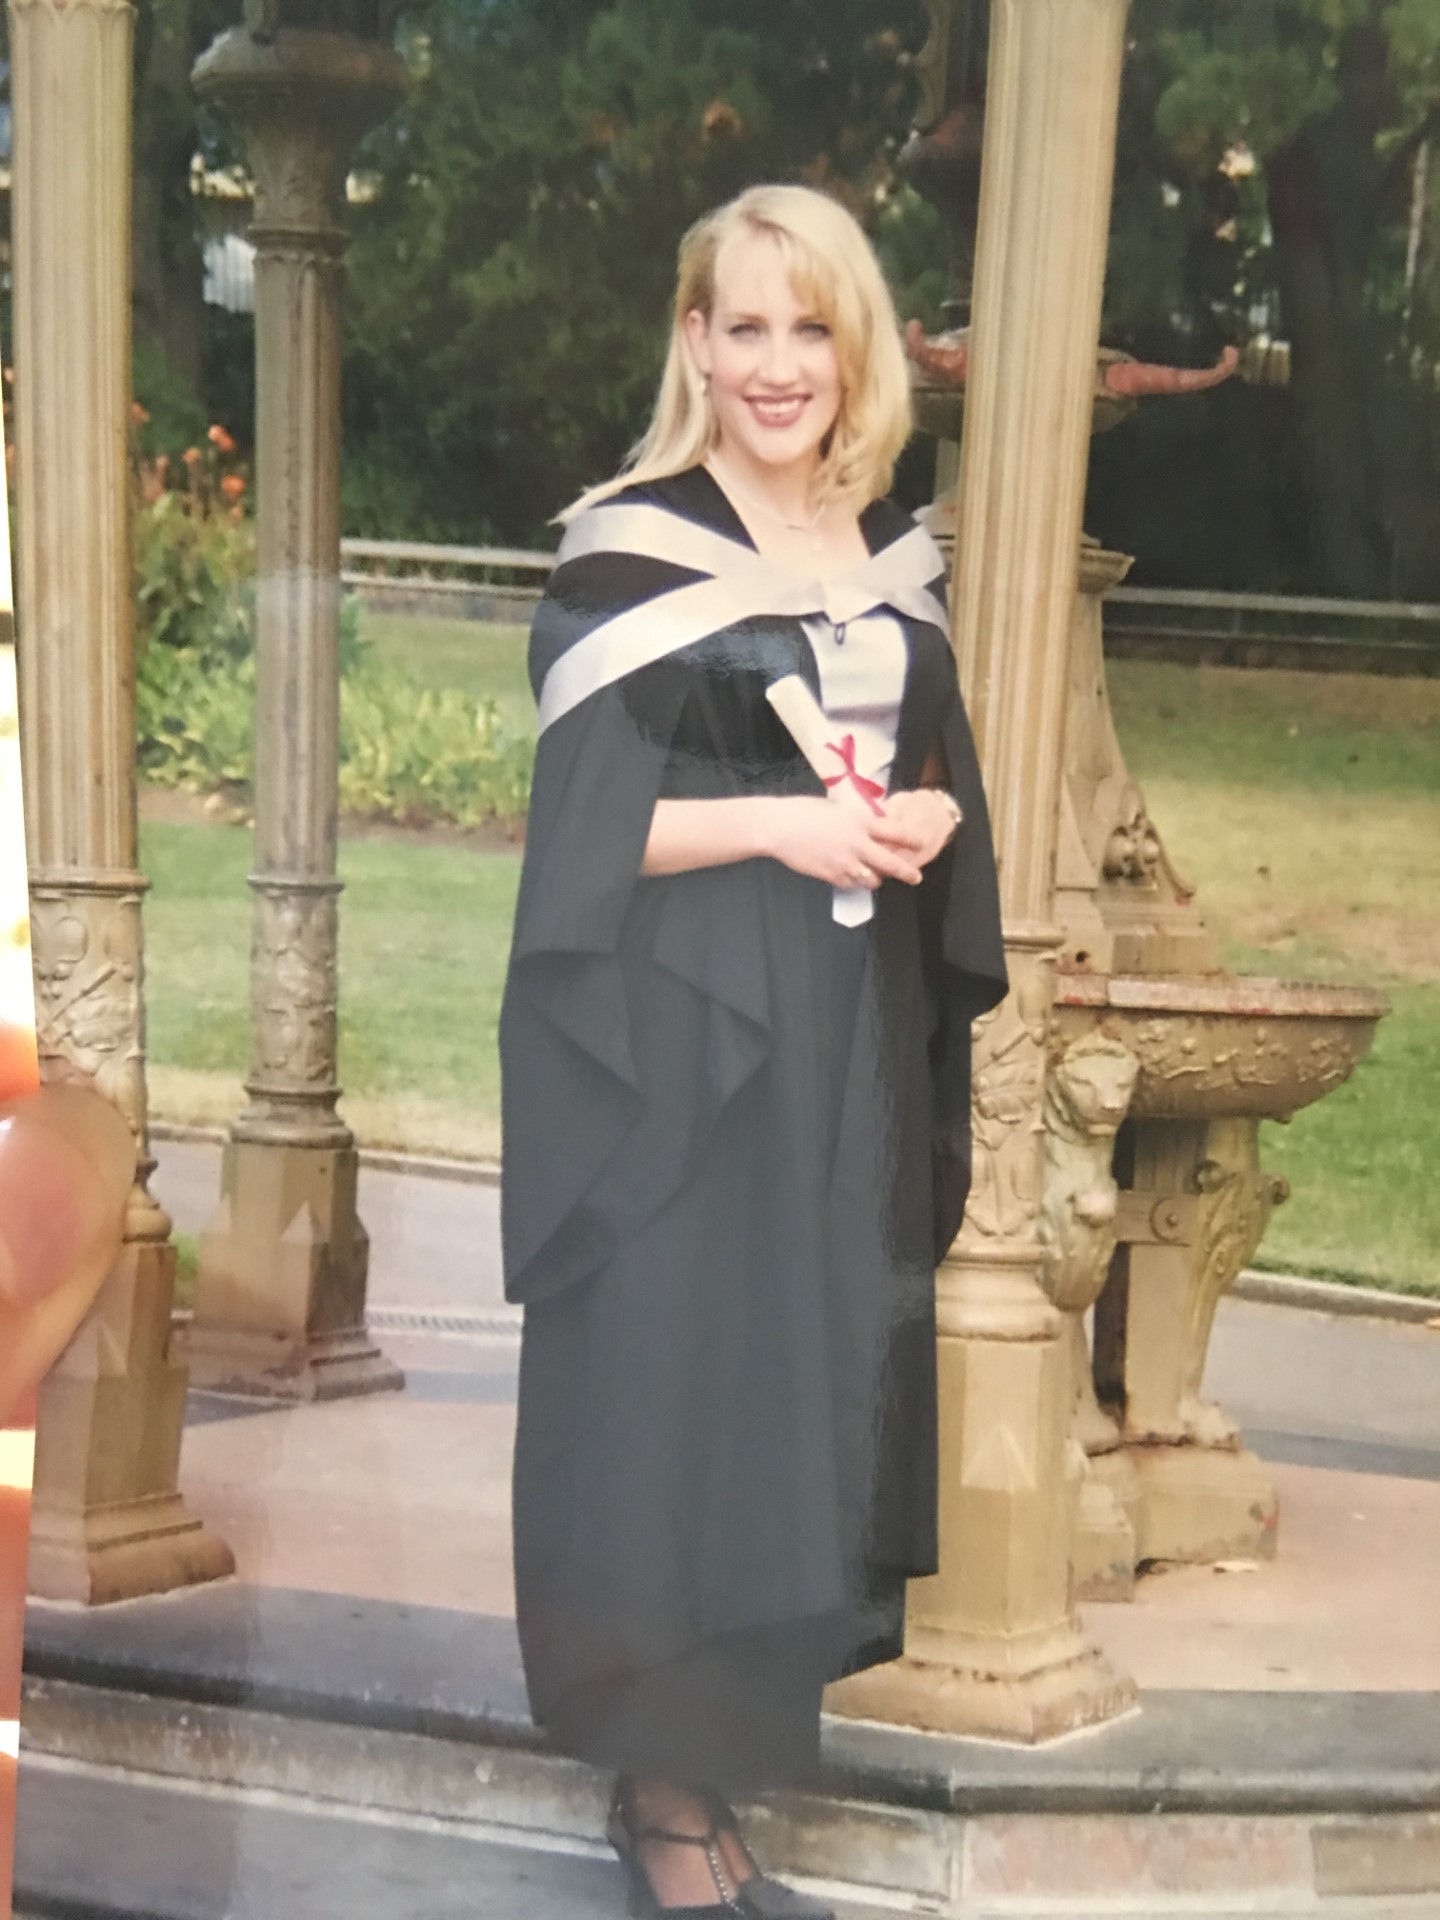 Emily Jade O'Keeffe graduates with her Bachelor of Performing Arts in Launceston in 1997, wearing her academic gown and hood (Picture: Emily Jade O’Keeffe)